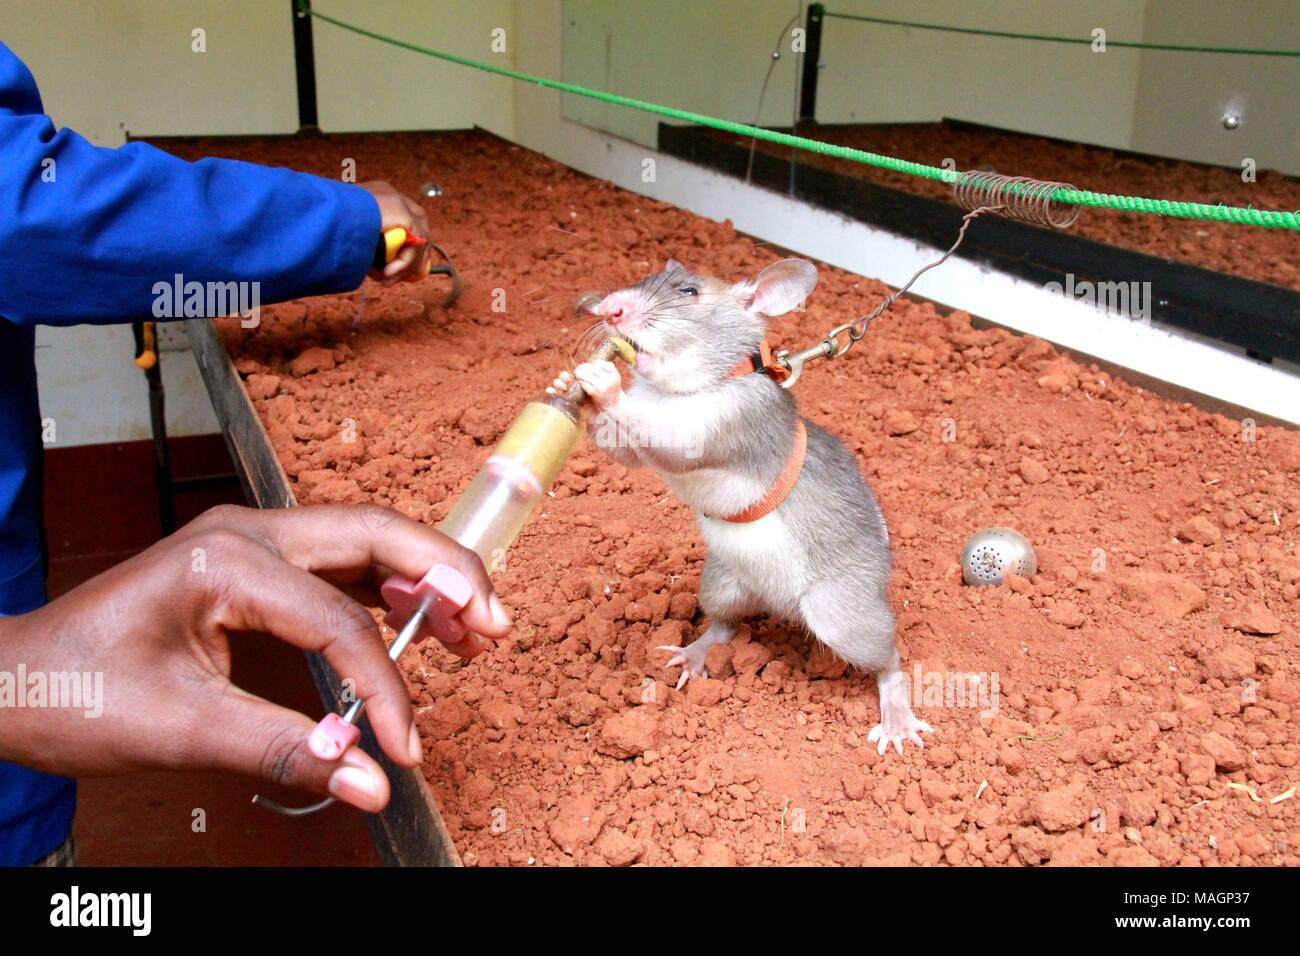 Morogoro, Tanzania. 2nd Apr, 2018. An African giant pouched rat receives  landmine detection training in Morogoro, Tanzania, March 23, 2018.  Tanzania-based non-profit organization APOPO has researched and pioneered  the use of African